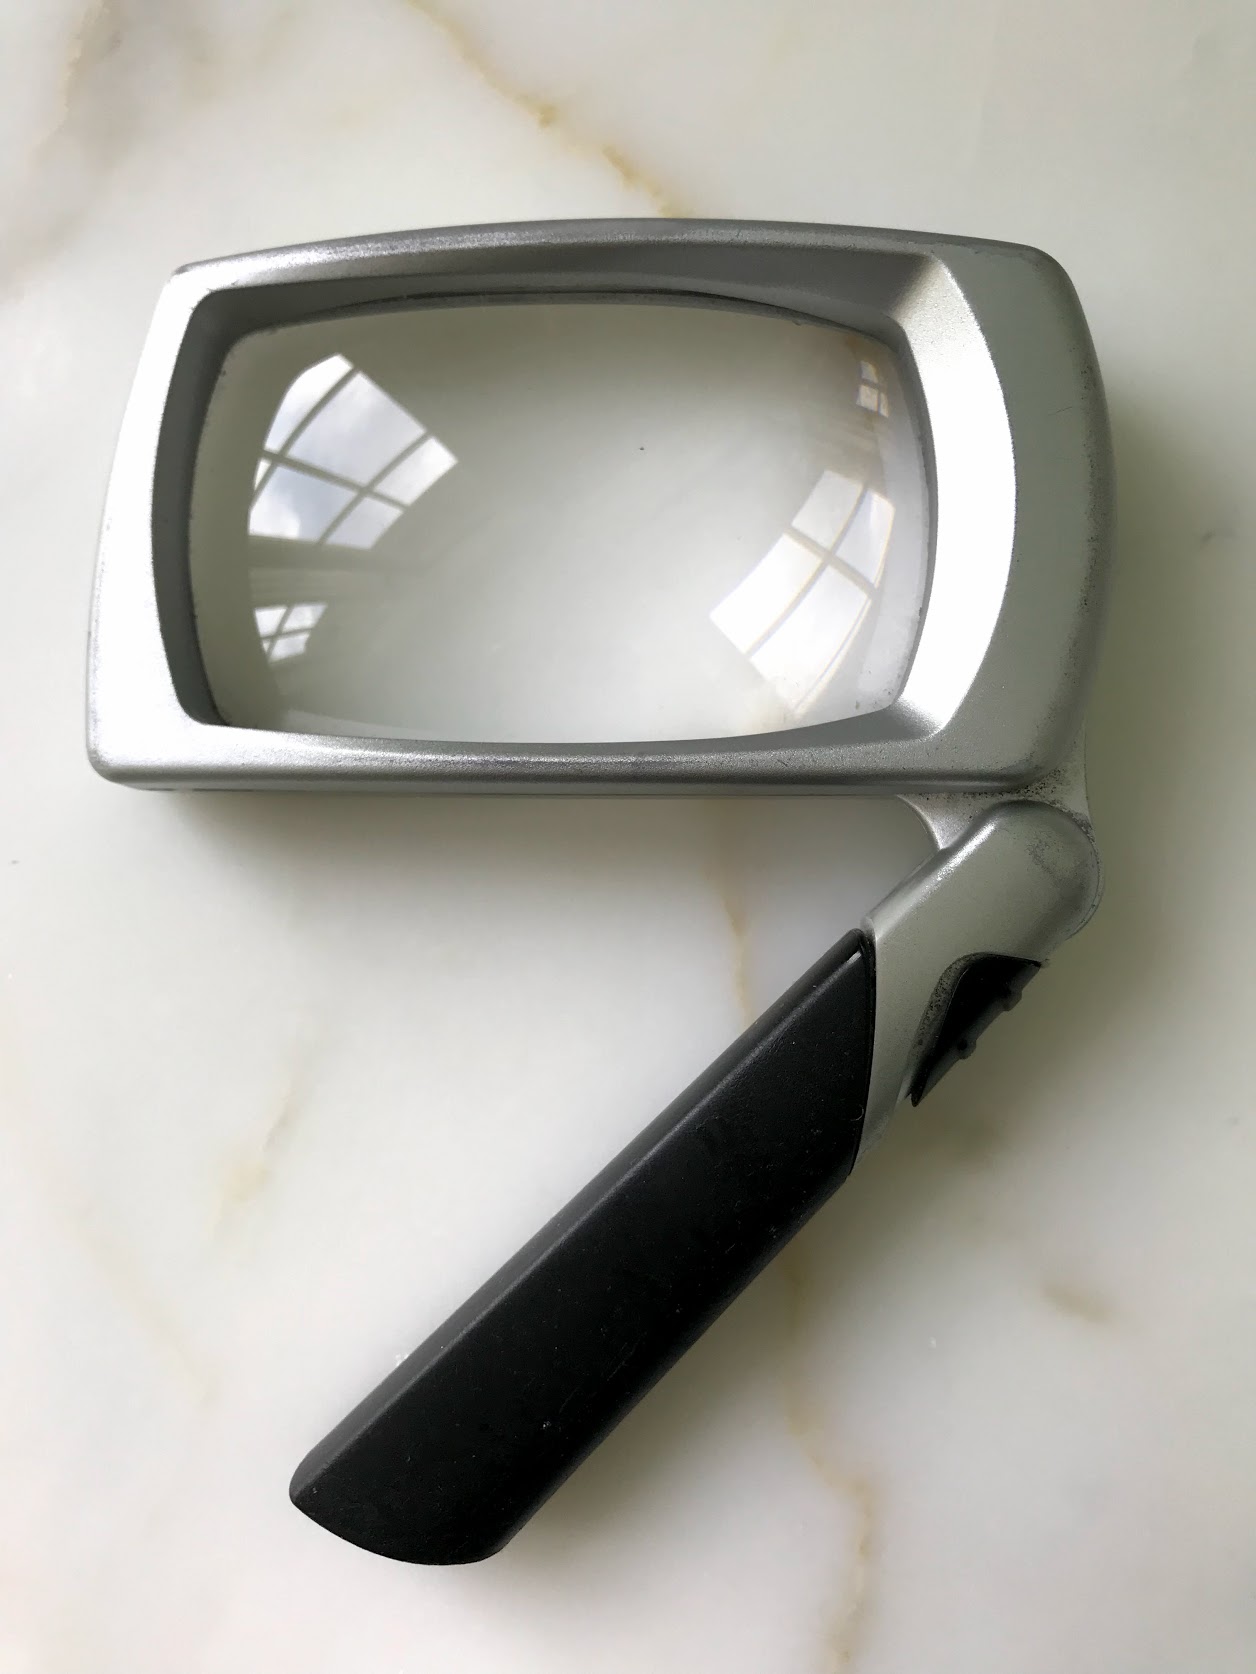 Pocket Magnifying Glass - Portable, Handheld and Lighted